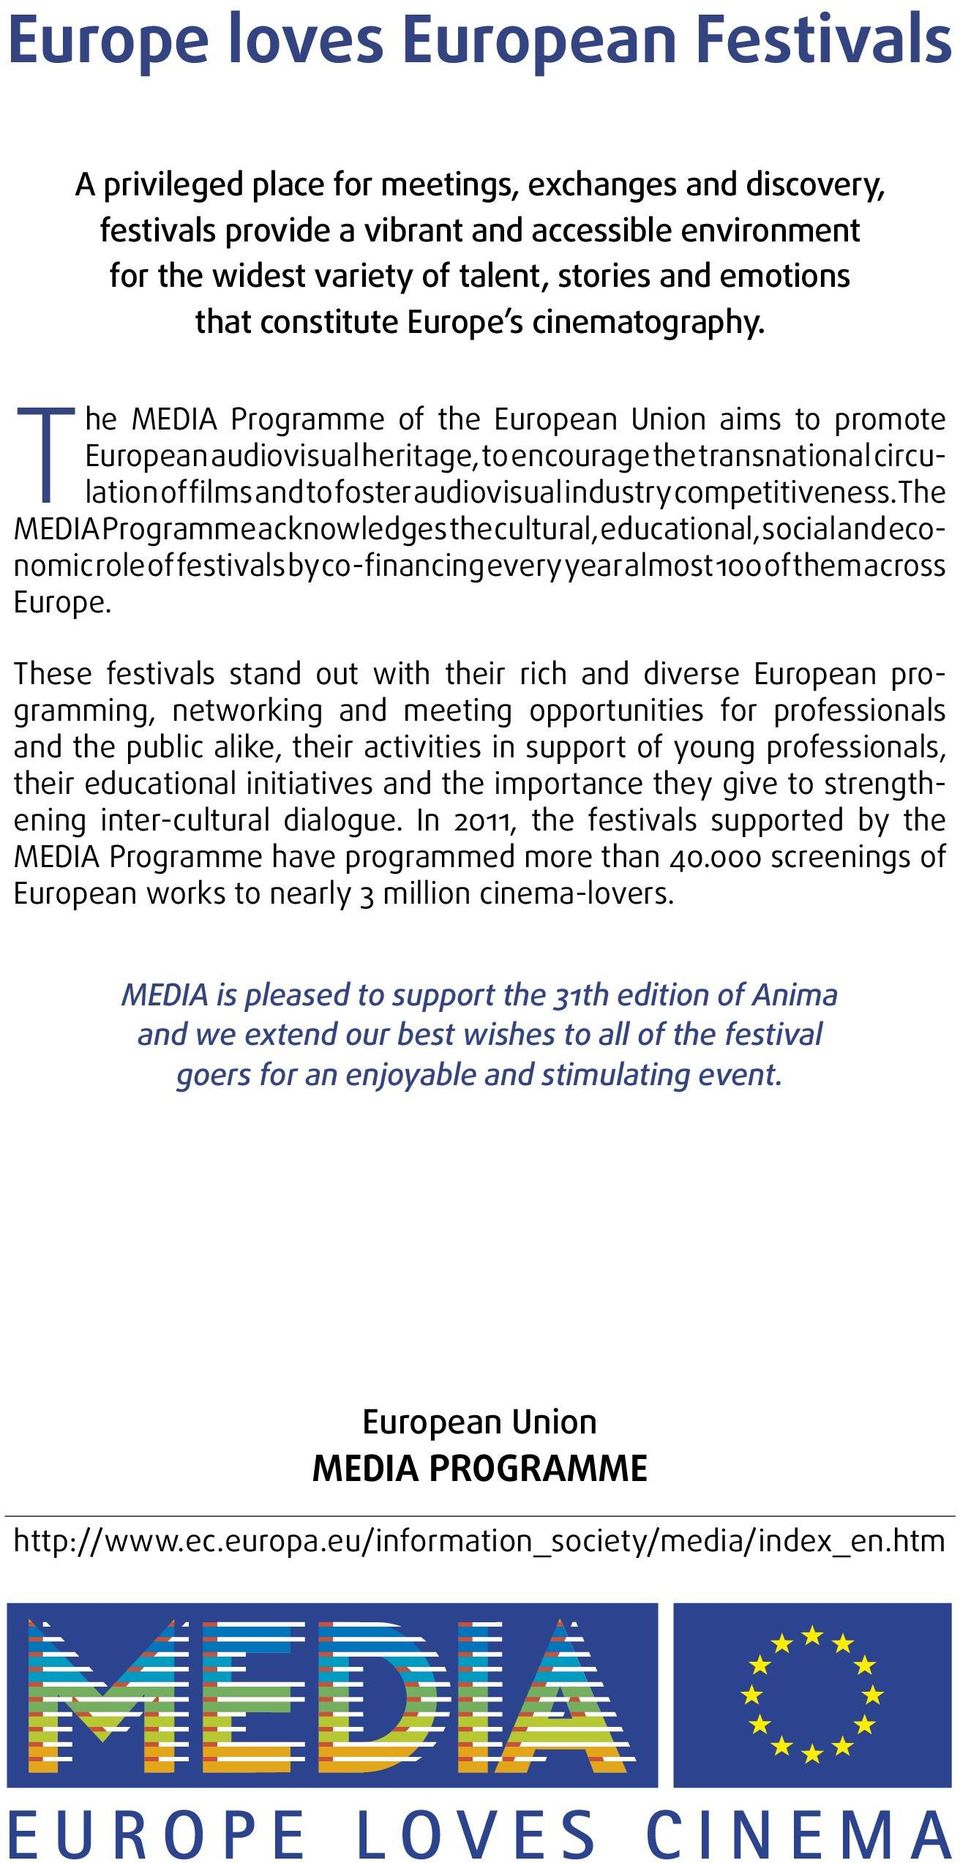 The MEDIA Programme of the European Union aims to promote European audiovisual heritage, to encourage the transnational circulation of films and to foster audiovisual industry competitiveness.